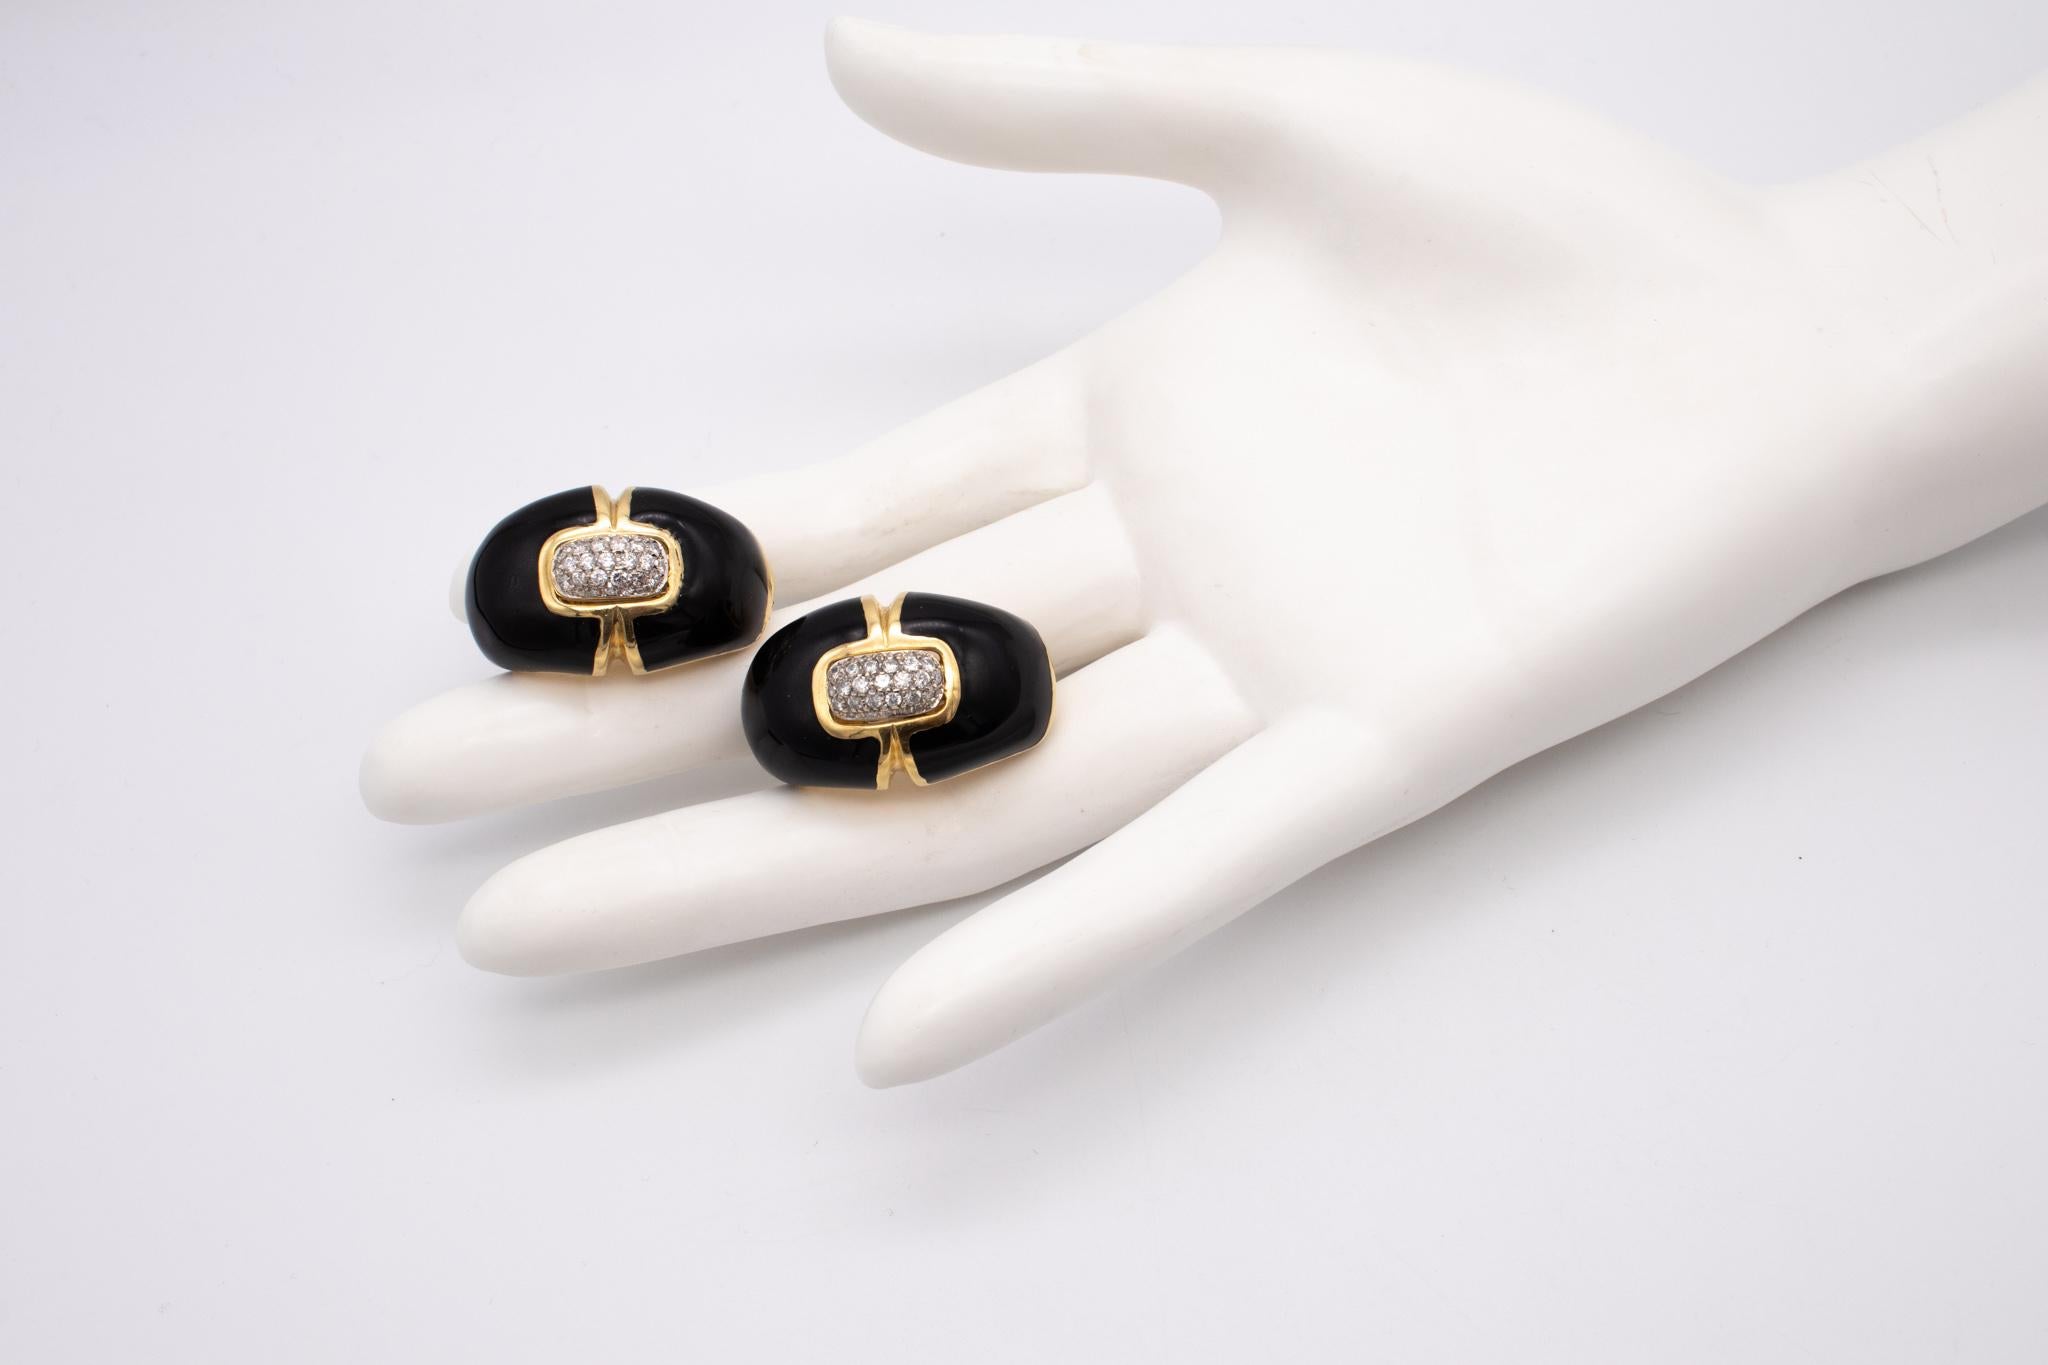 Modernist Roberto Legnazzi 1970 Earrings 18Kt Gold With Black Enamel And 1.16 Ctw Diamonds For Sale